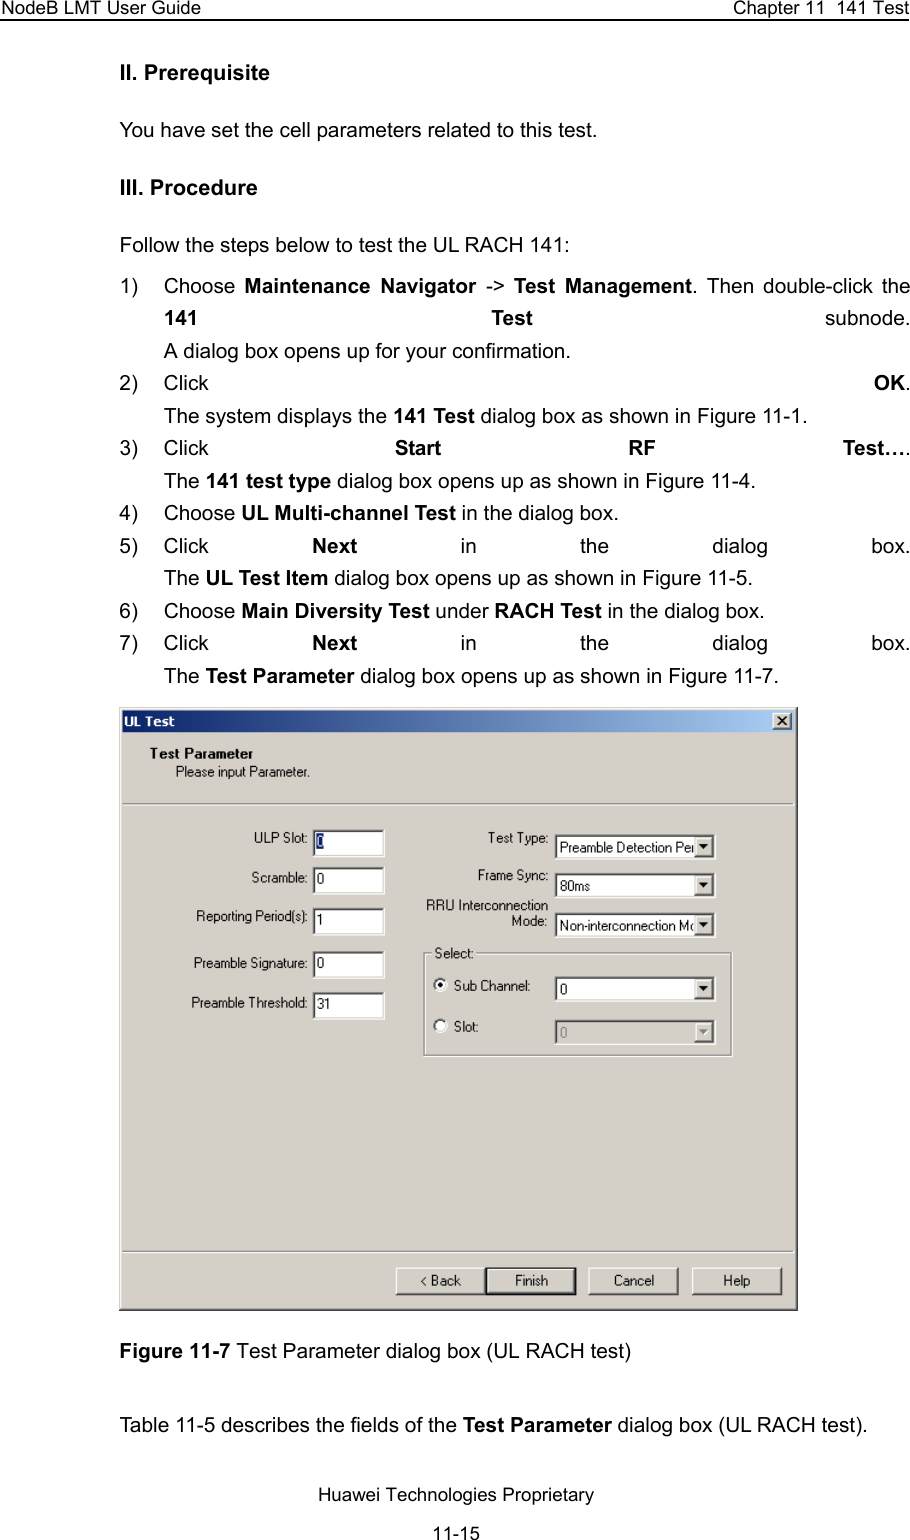 NodeB LMT User Guide  Chapter 11  141 Test II. Prerequisite You have set the cell parameters related to this test.  III. Procedure Follow the steps below to test the UL RACH 141:  1) Choose Maintenance Navigator -&gt;  Test Management. Then double-click the 141 Test subnode.  A dialog box opens up for your confirmation. 2) Click  OK.  The system displays the 141 Test dialog box as shown in Figure 11-1. 3) Click  Start RF Test….  The 141 test type dialog box opens up as shown in Figure 11-4. 4) Choose UL Multi-channel Test in the dialog box.  5) Click  Next in the dialog box.  The UL Test Item dialog box opens up as shown in Figure 11-5. 6) Choose Main Diversity Test under RACH Test in the dialog box.  7) Click  Next in the dialog box.  The Test Parameter dialog box opens up as shown in Figure 11-7.  Figure 11-7 Test Parameter dialog box (UL RACH test) Table 11-5 describes the fields of the Test Parameter dialog box (UL RACH test).  Huawei Technologies Proprietary 11-15 